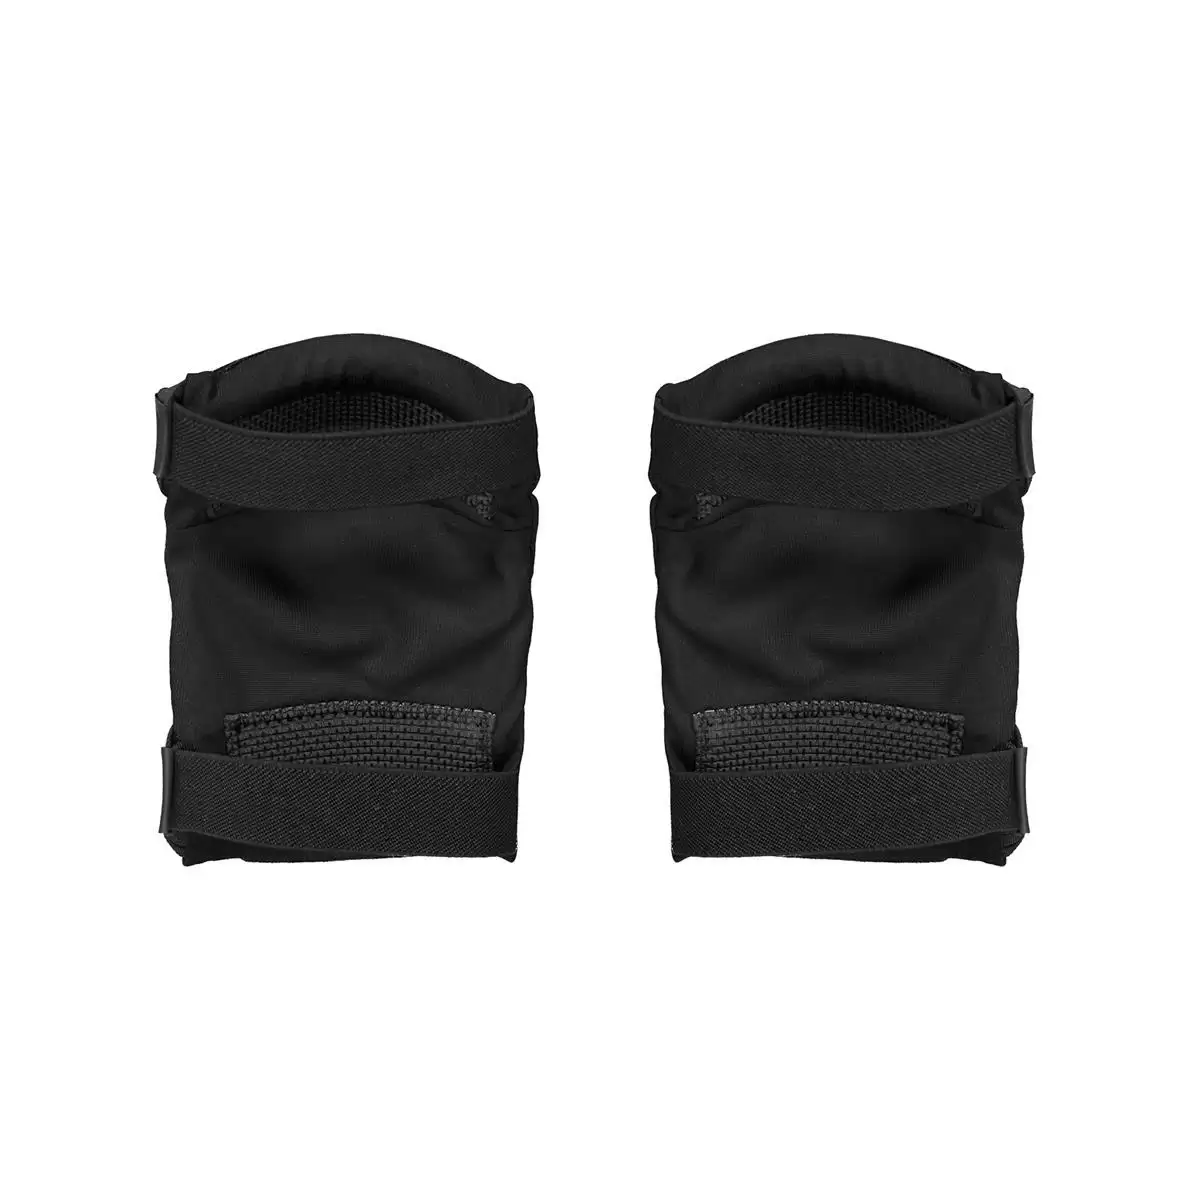 Kid knee / Elbow pads POCito Joint VPD Air Protector Black Size S #2